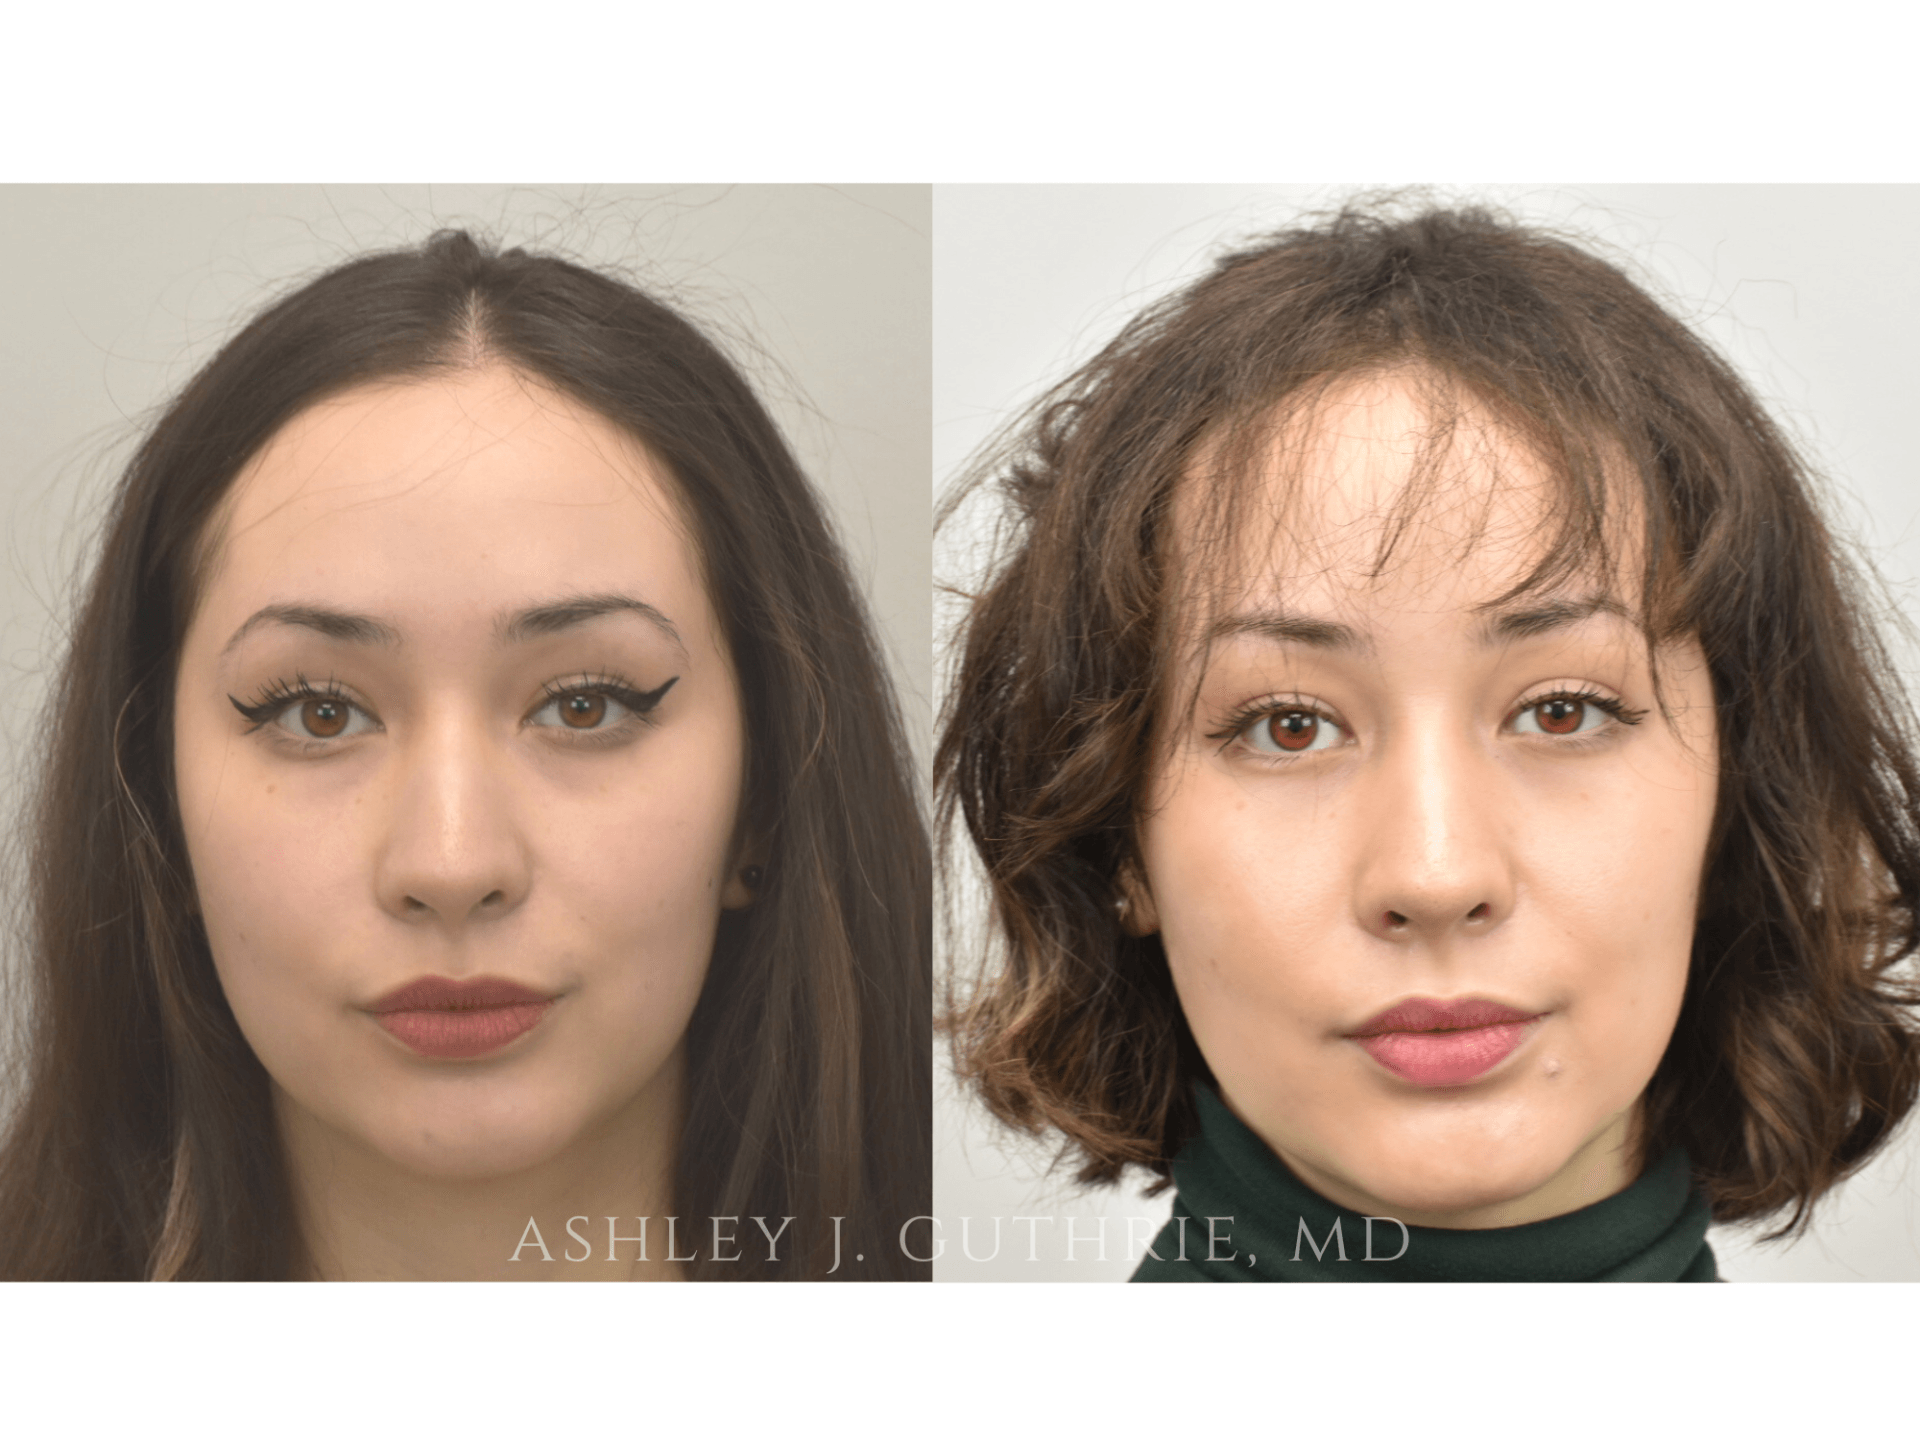 Blepharoplasty - Before and After